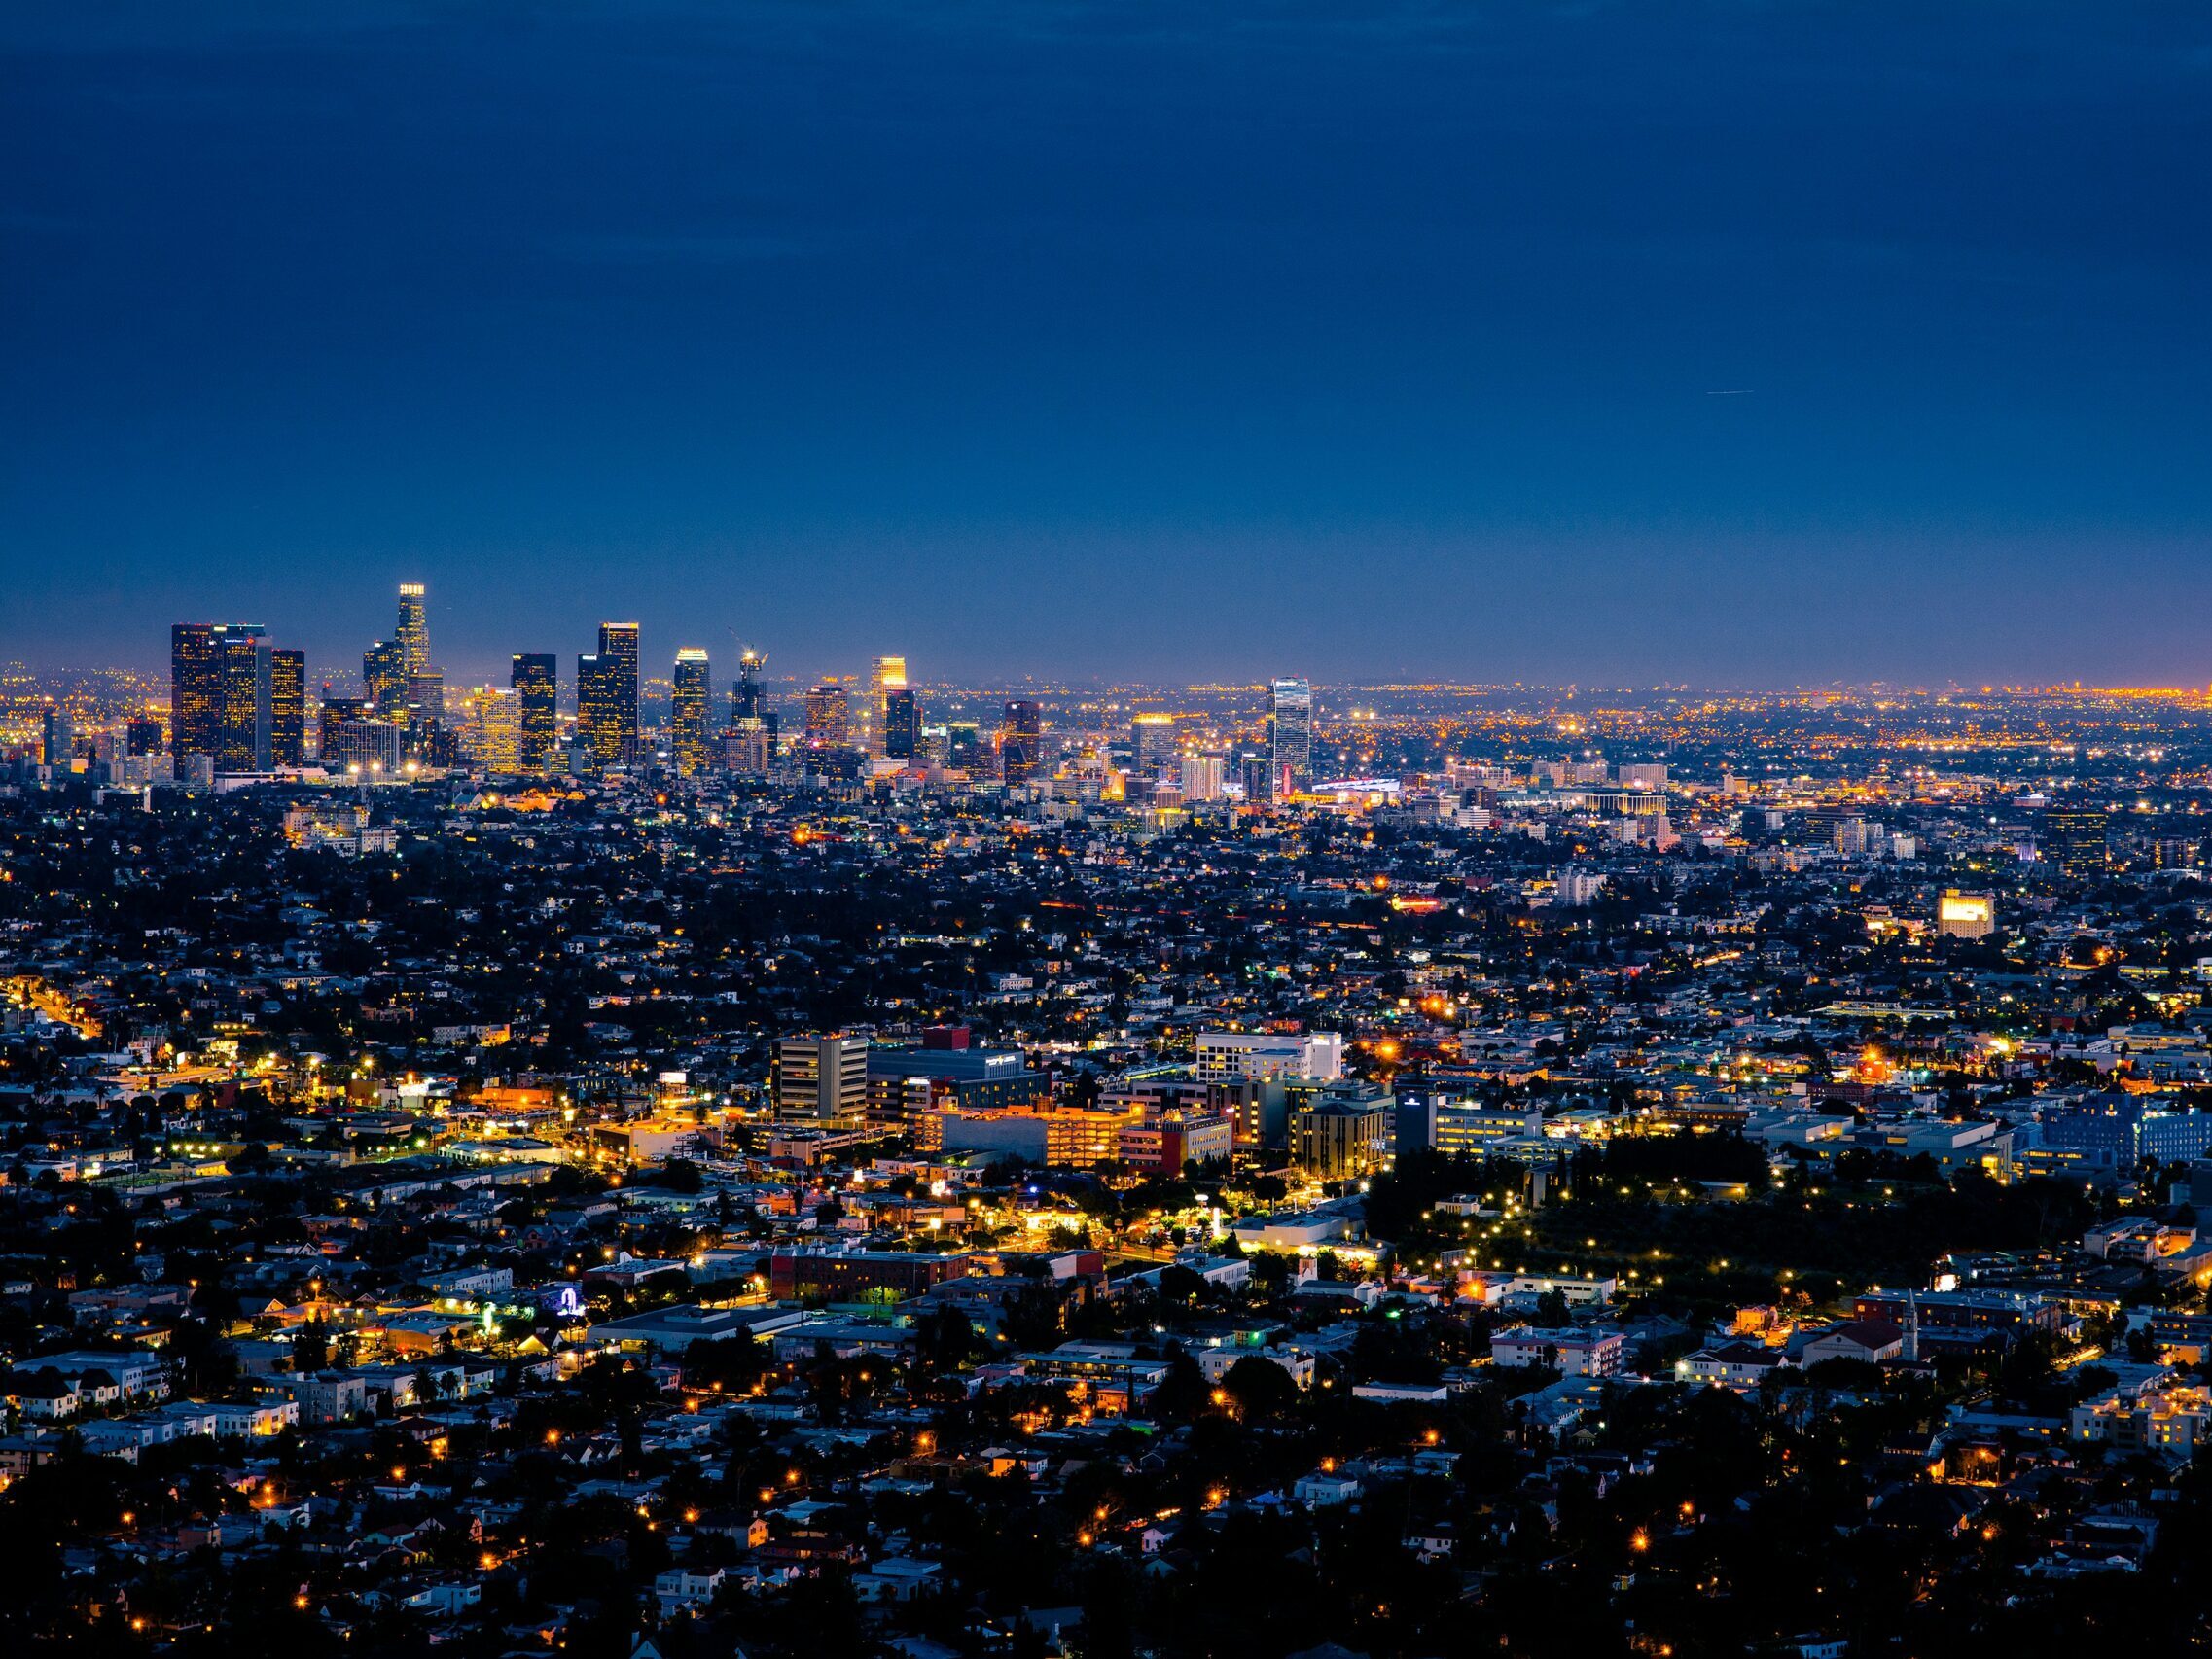 Los Angeles and California: Environmental Policy as a Catalyst for the Cleantech Ecosystem